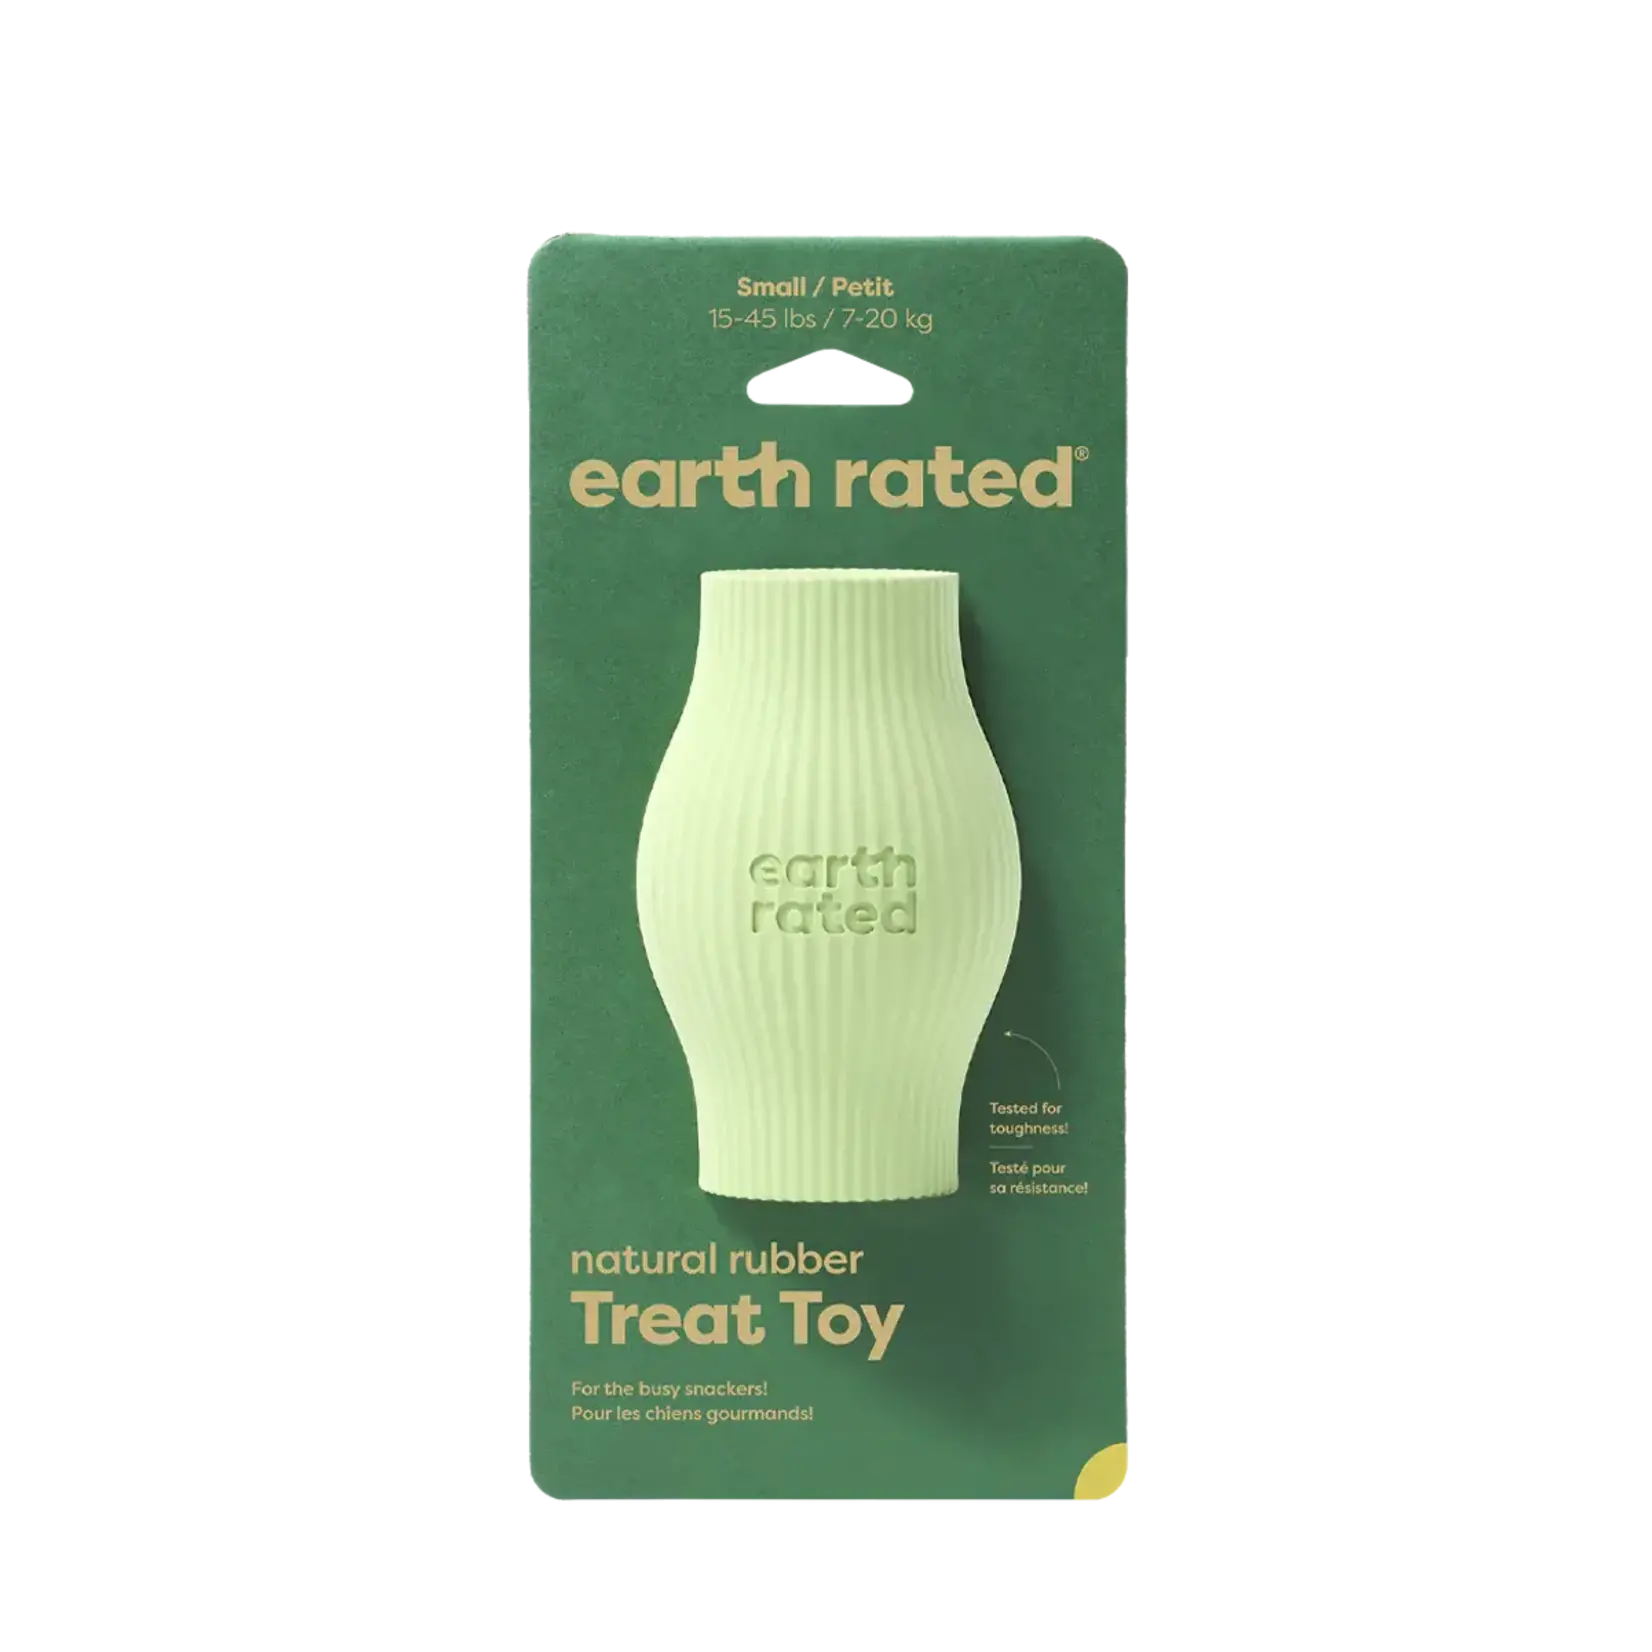 Earth Rated Earth Rated: Treat Toy